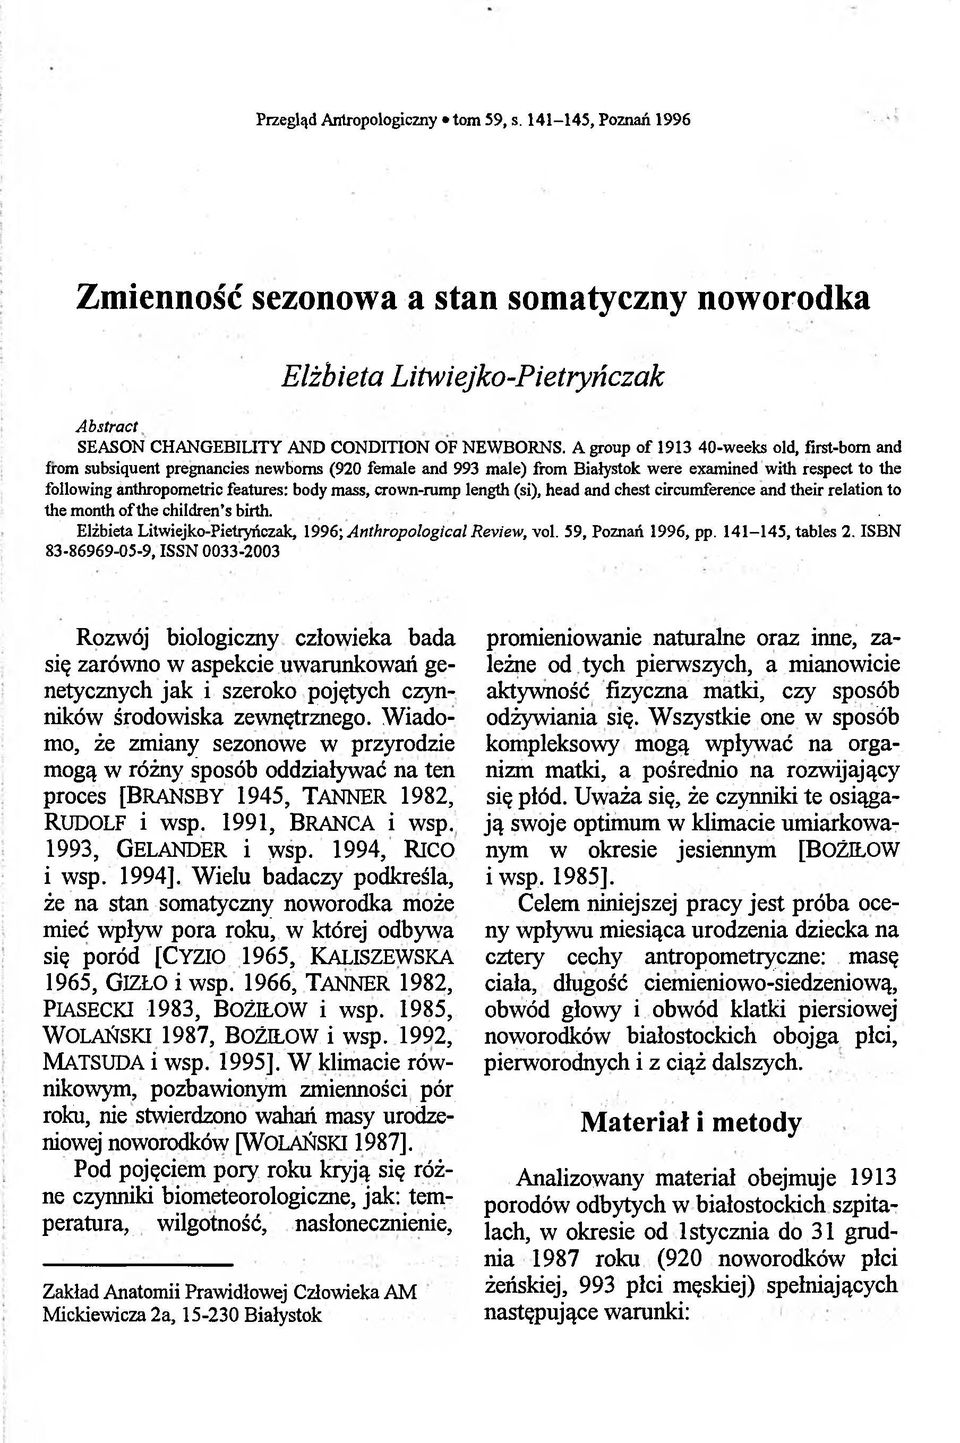 mass, crown-rump length (si), head and chest circumference and their relation to the month ofthe children s birth.. Elżbieta Litwiejko-Pietryńczak, 1996; Anthropological Review, vol.